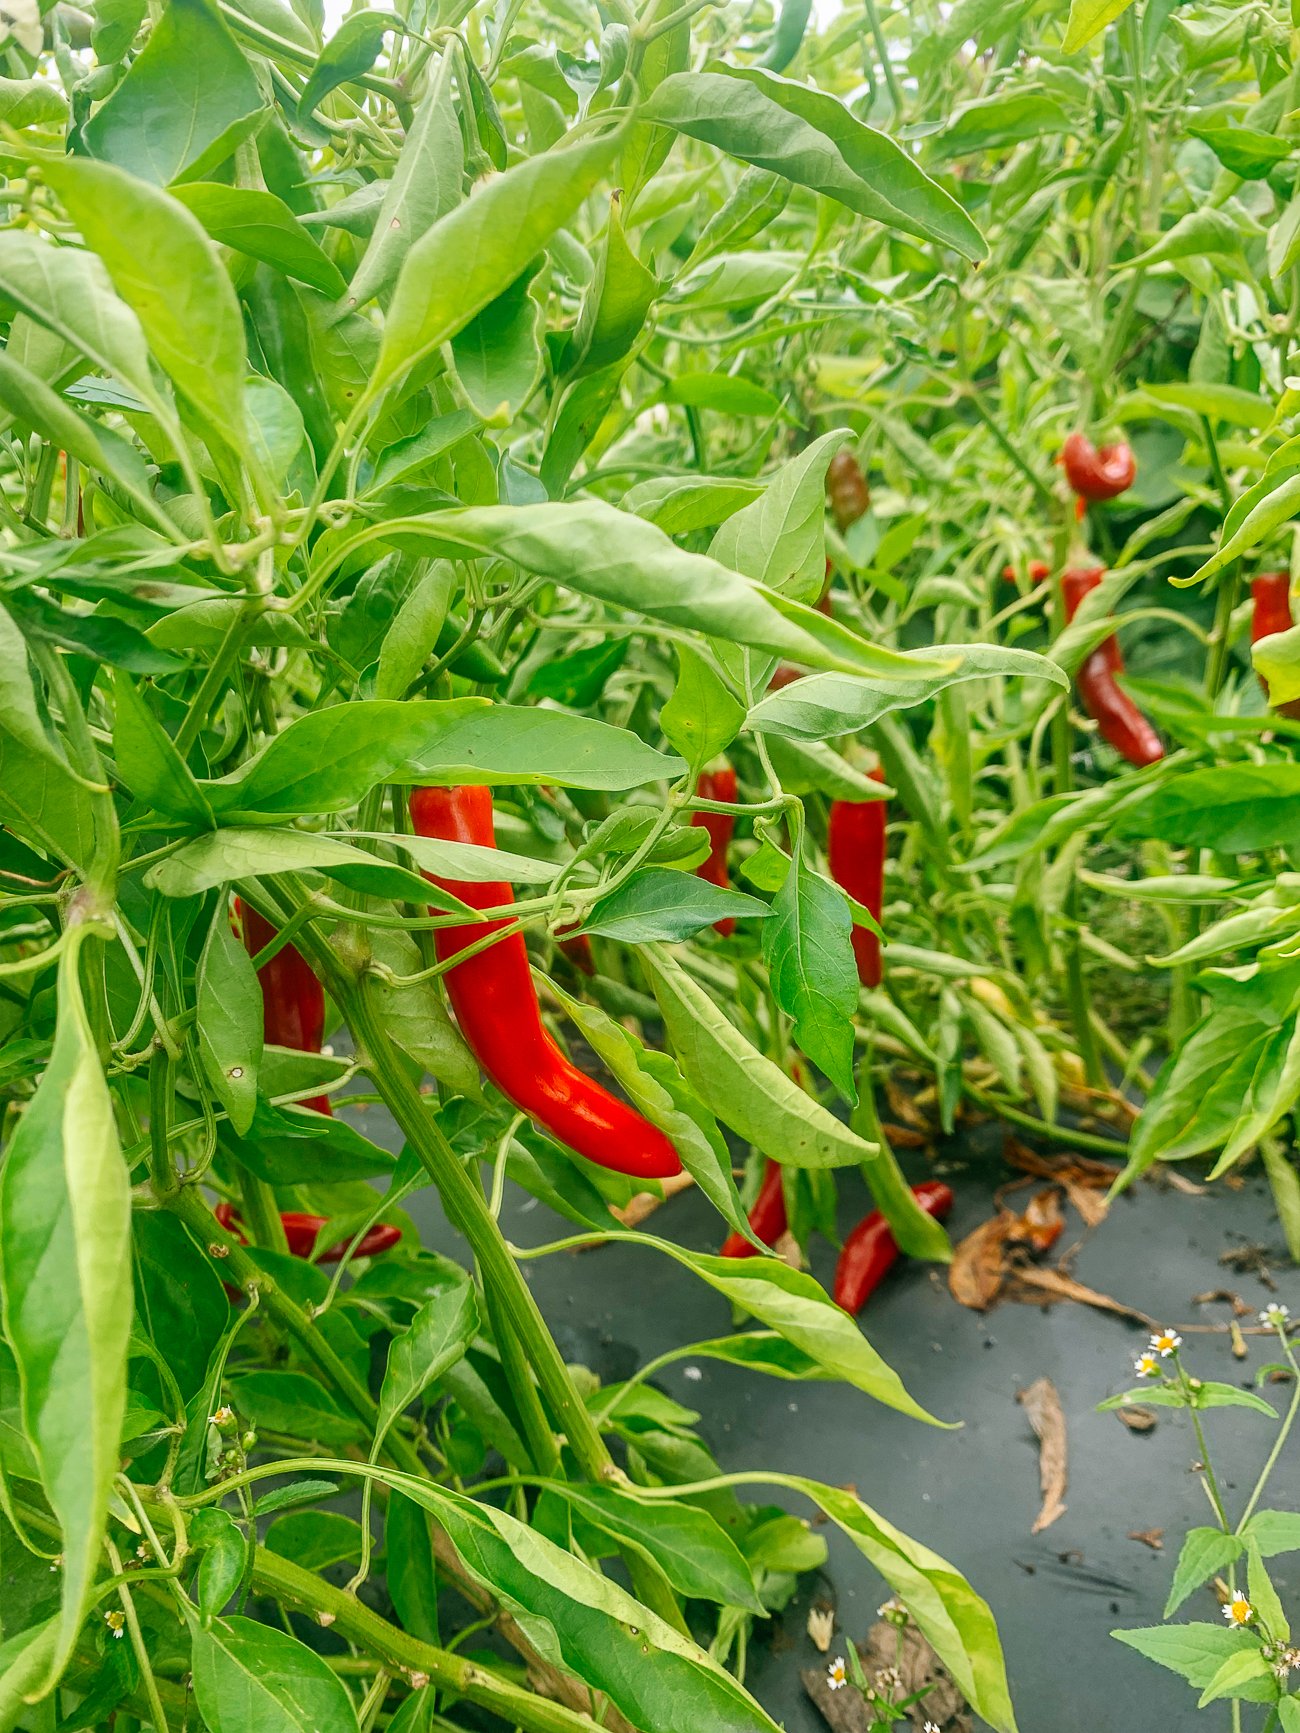 Korean gochu chili peppers growing on plant